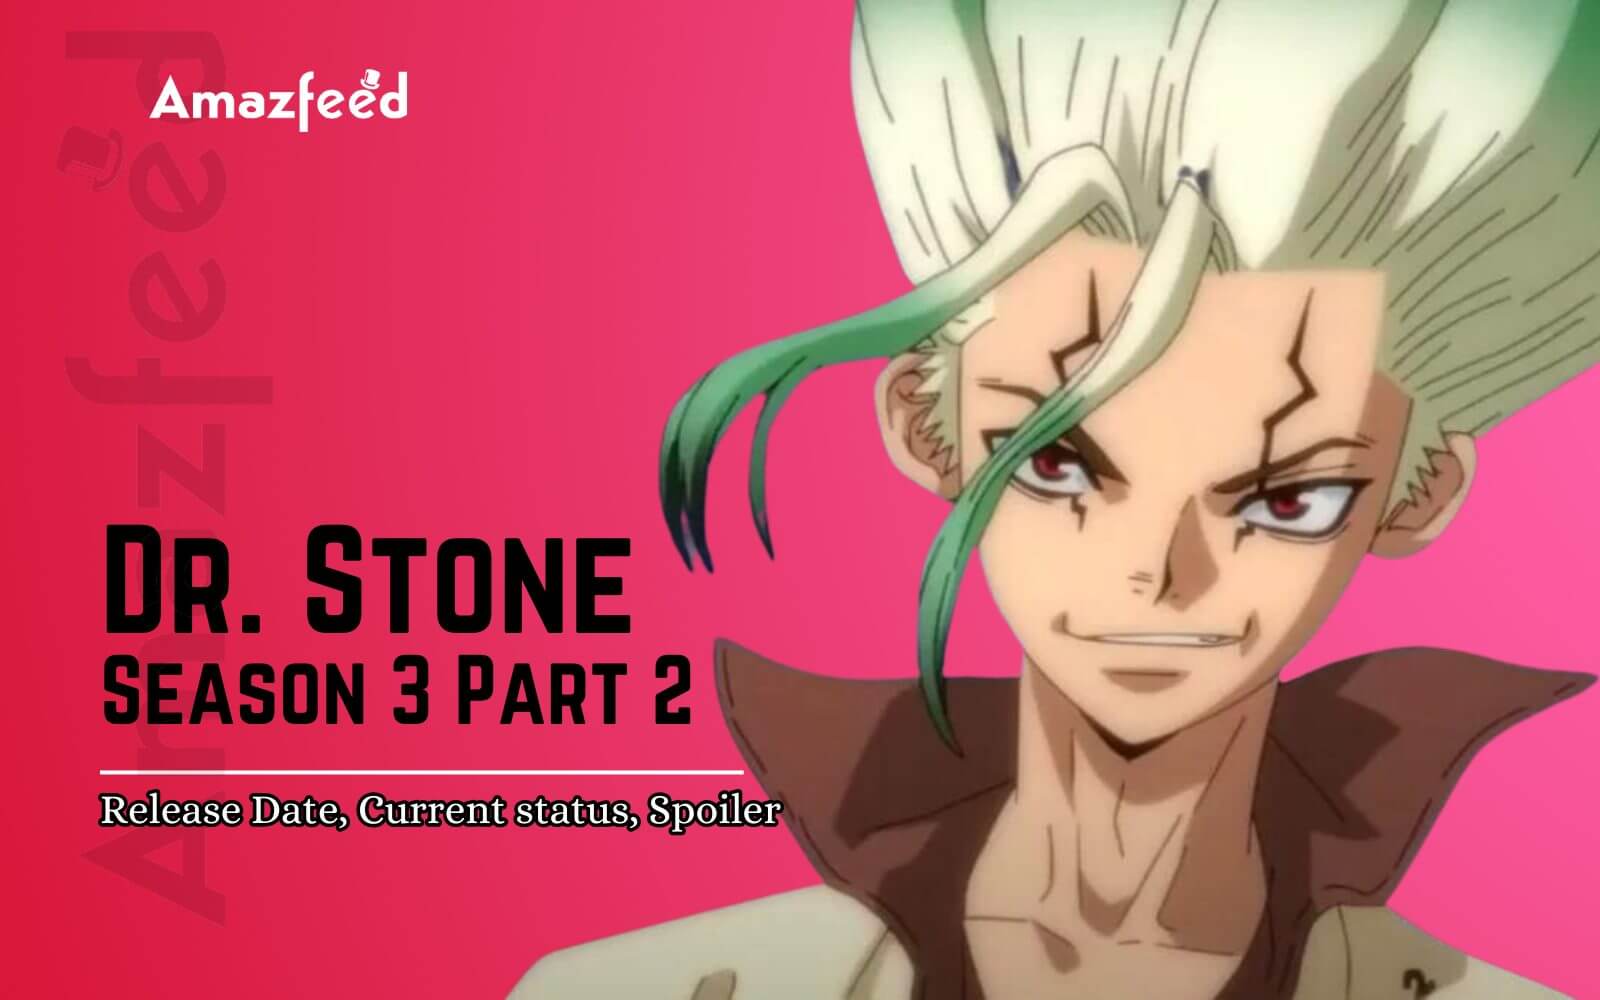 Dr. Stone New World season 3 part 2 reveals new trailer and release date